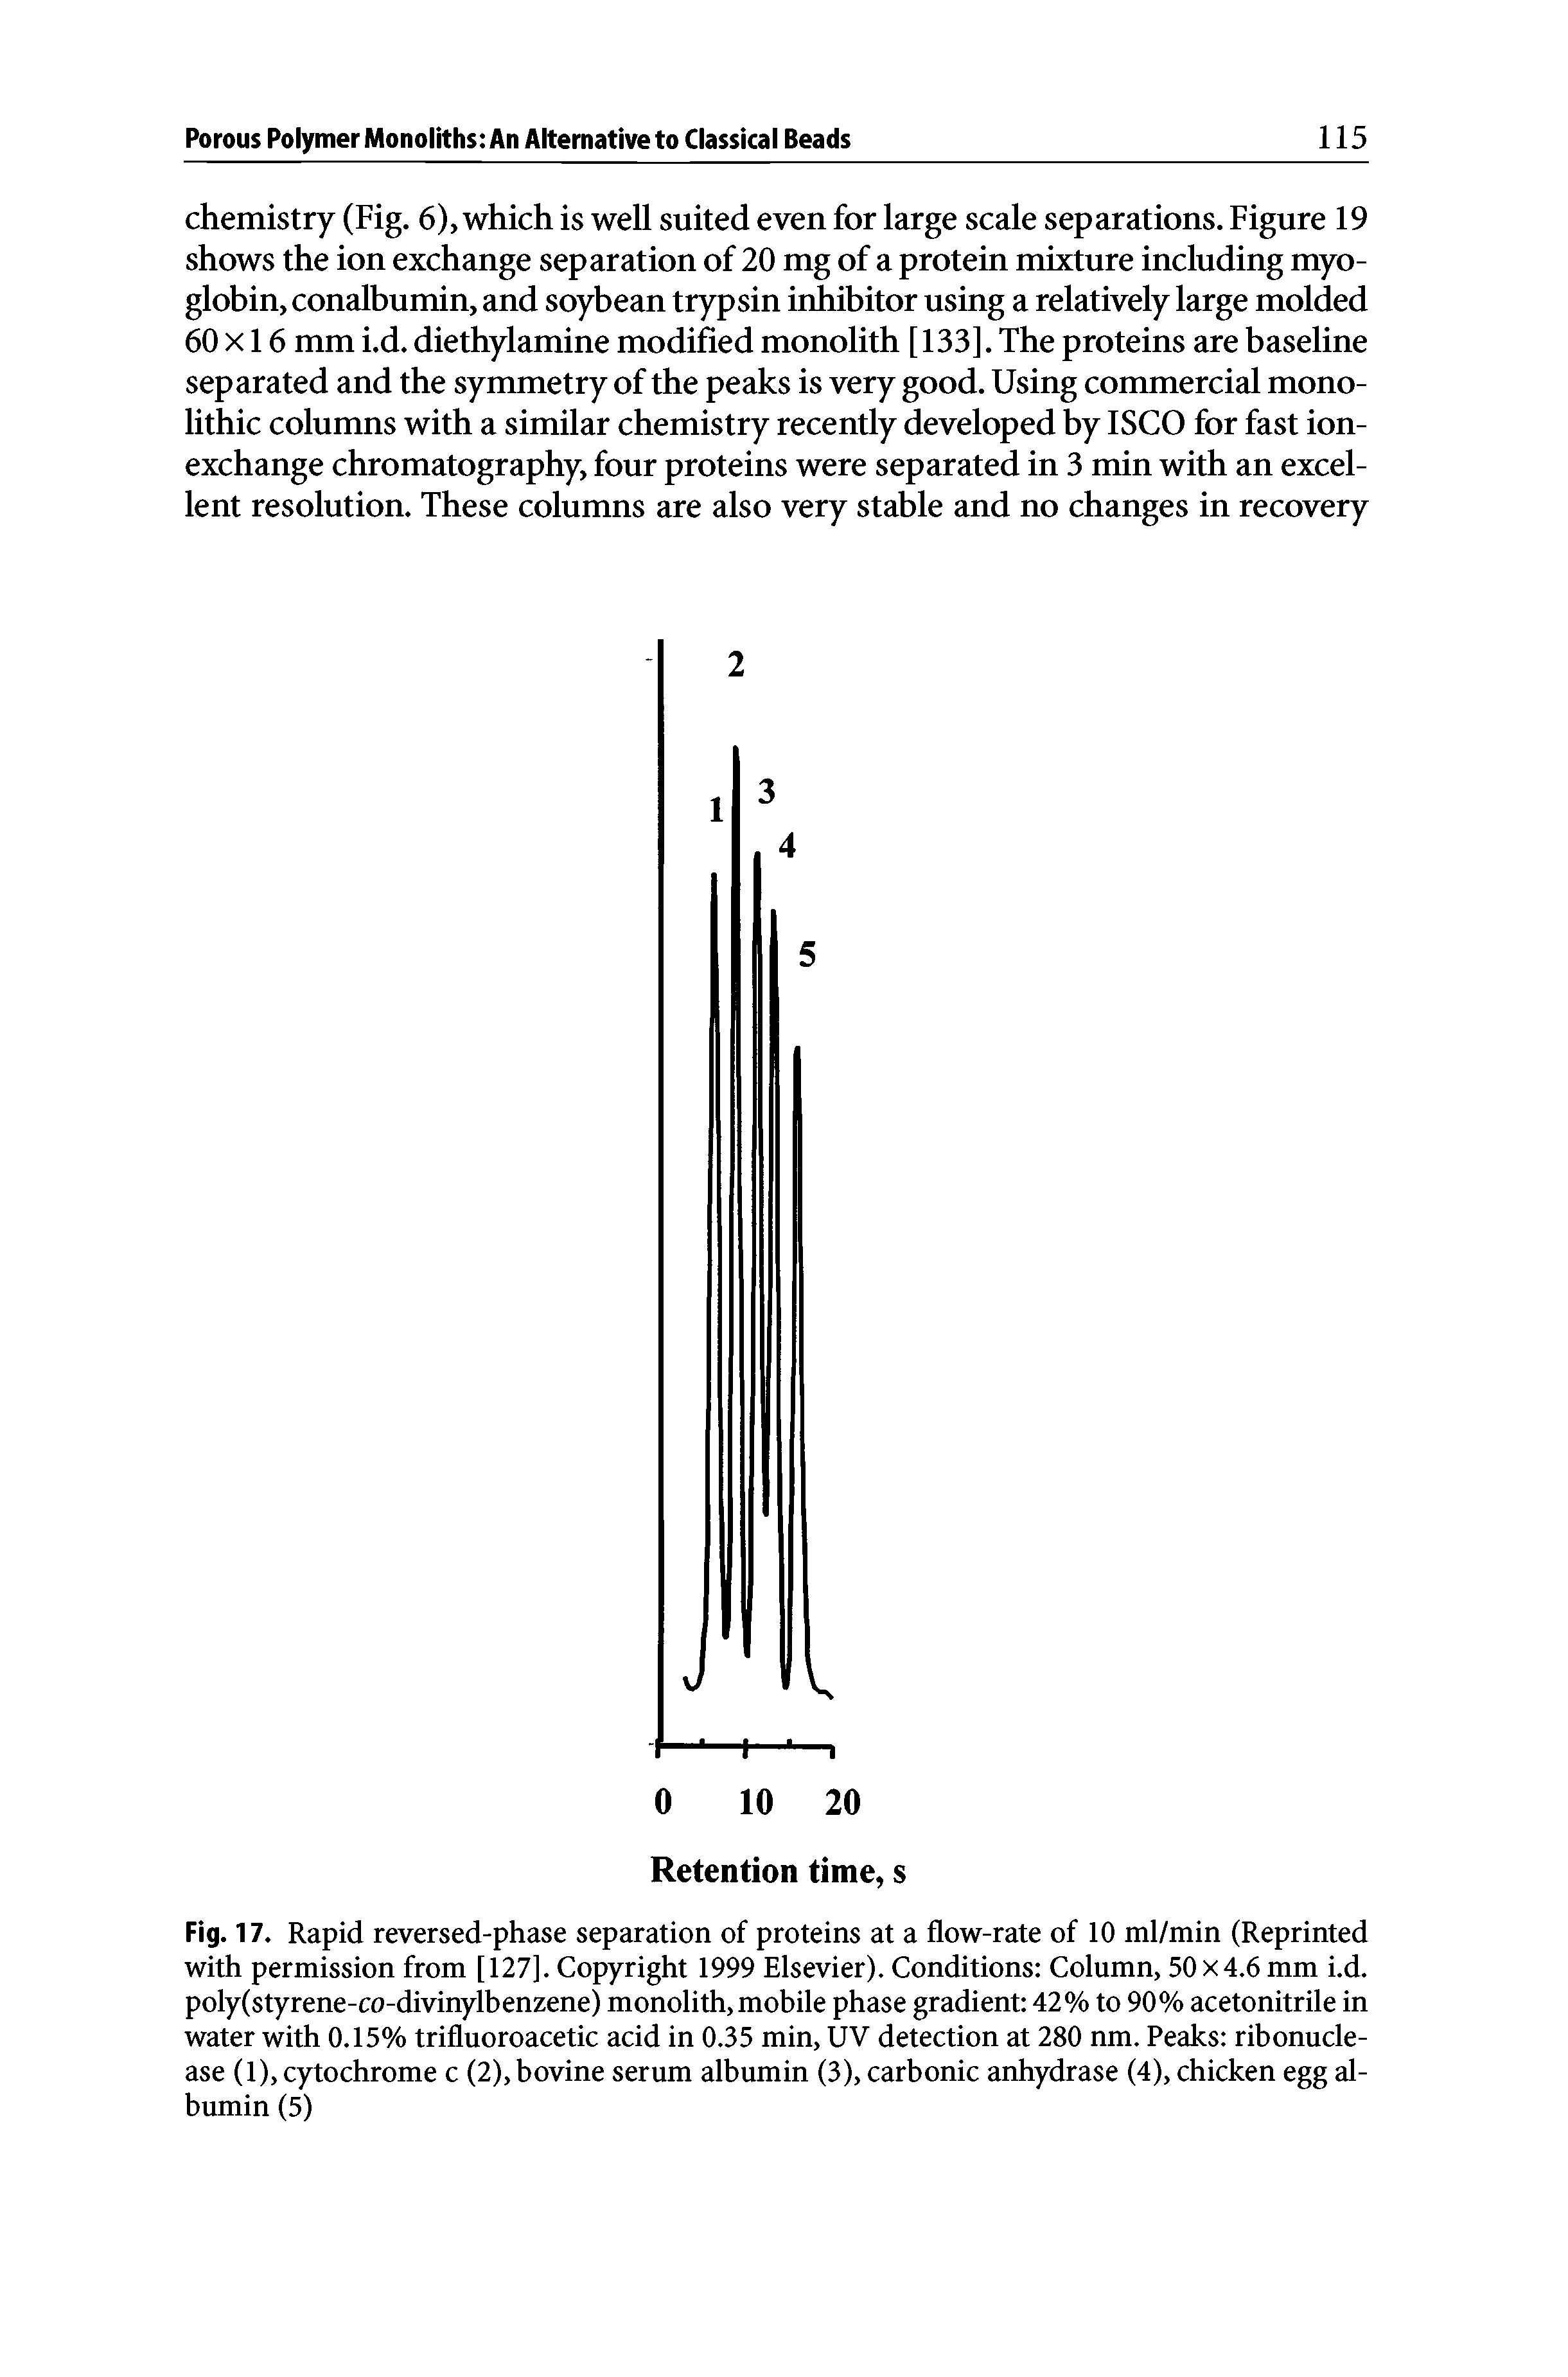 Fig. 17. Rapid reversed-phase separation of proteins at a flow-rate of 10 ml/min (Reprinted with permission from [127]. Copyright 1999 Elsevier). Conditions Column, 50x4.6 mm i.d. poly(styrene-co-divinylbenzene) monolith,mobile phase gradient 42% to 90% acetonitrile in water with 0.15% trifluoroacetic acid in 0.35 min, UV detection at 280 nm. Peaks ribonucle-ase (1), cytochrome c (2), bovine serum albumin (3), carbonic anhydrase (4), chicken egg albumin (5)...